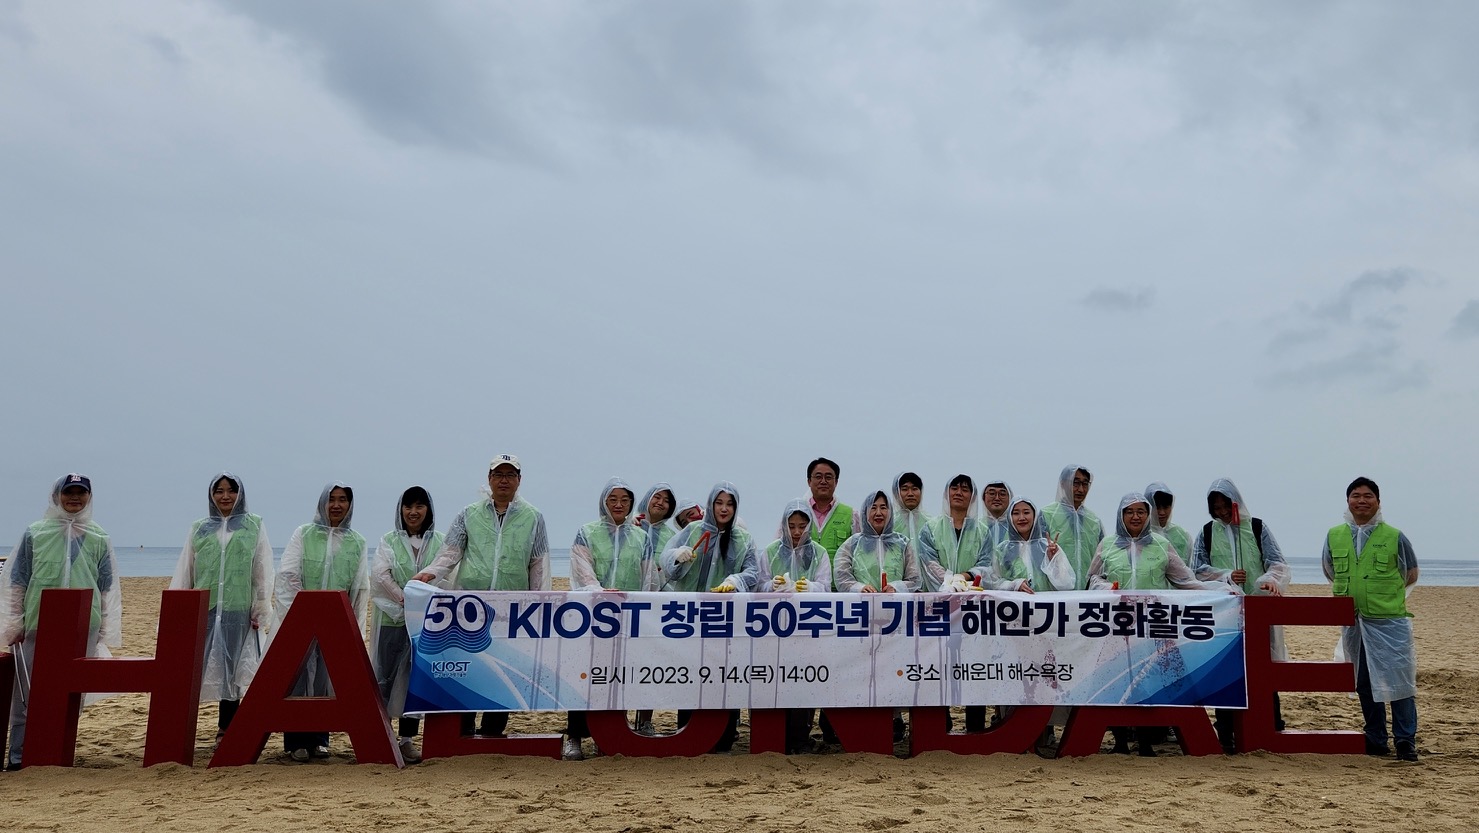 KIOST conducts Haeundae Beach cleanup activities to commemorate its 50th anniversary